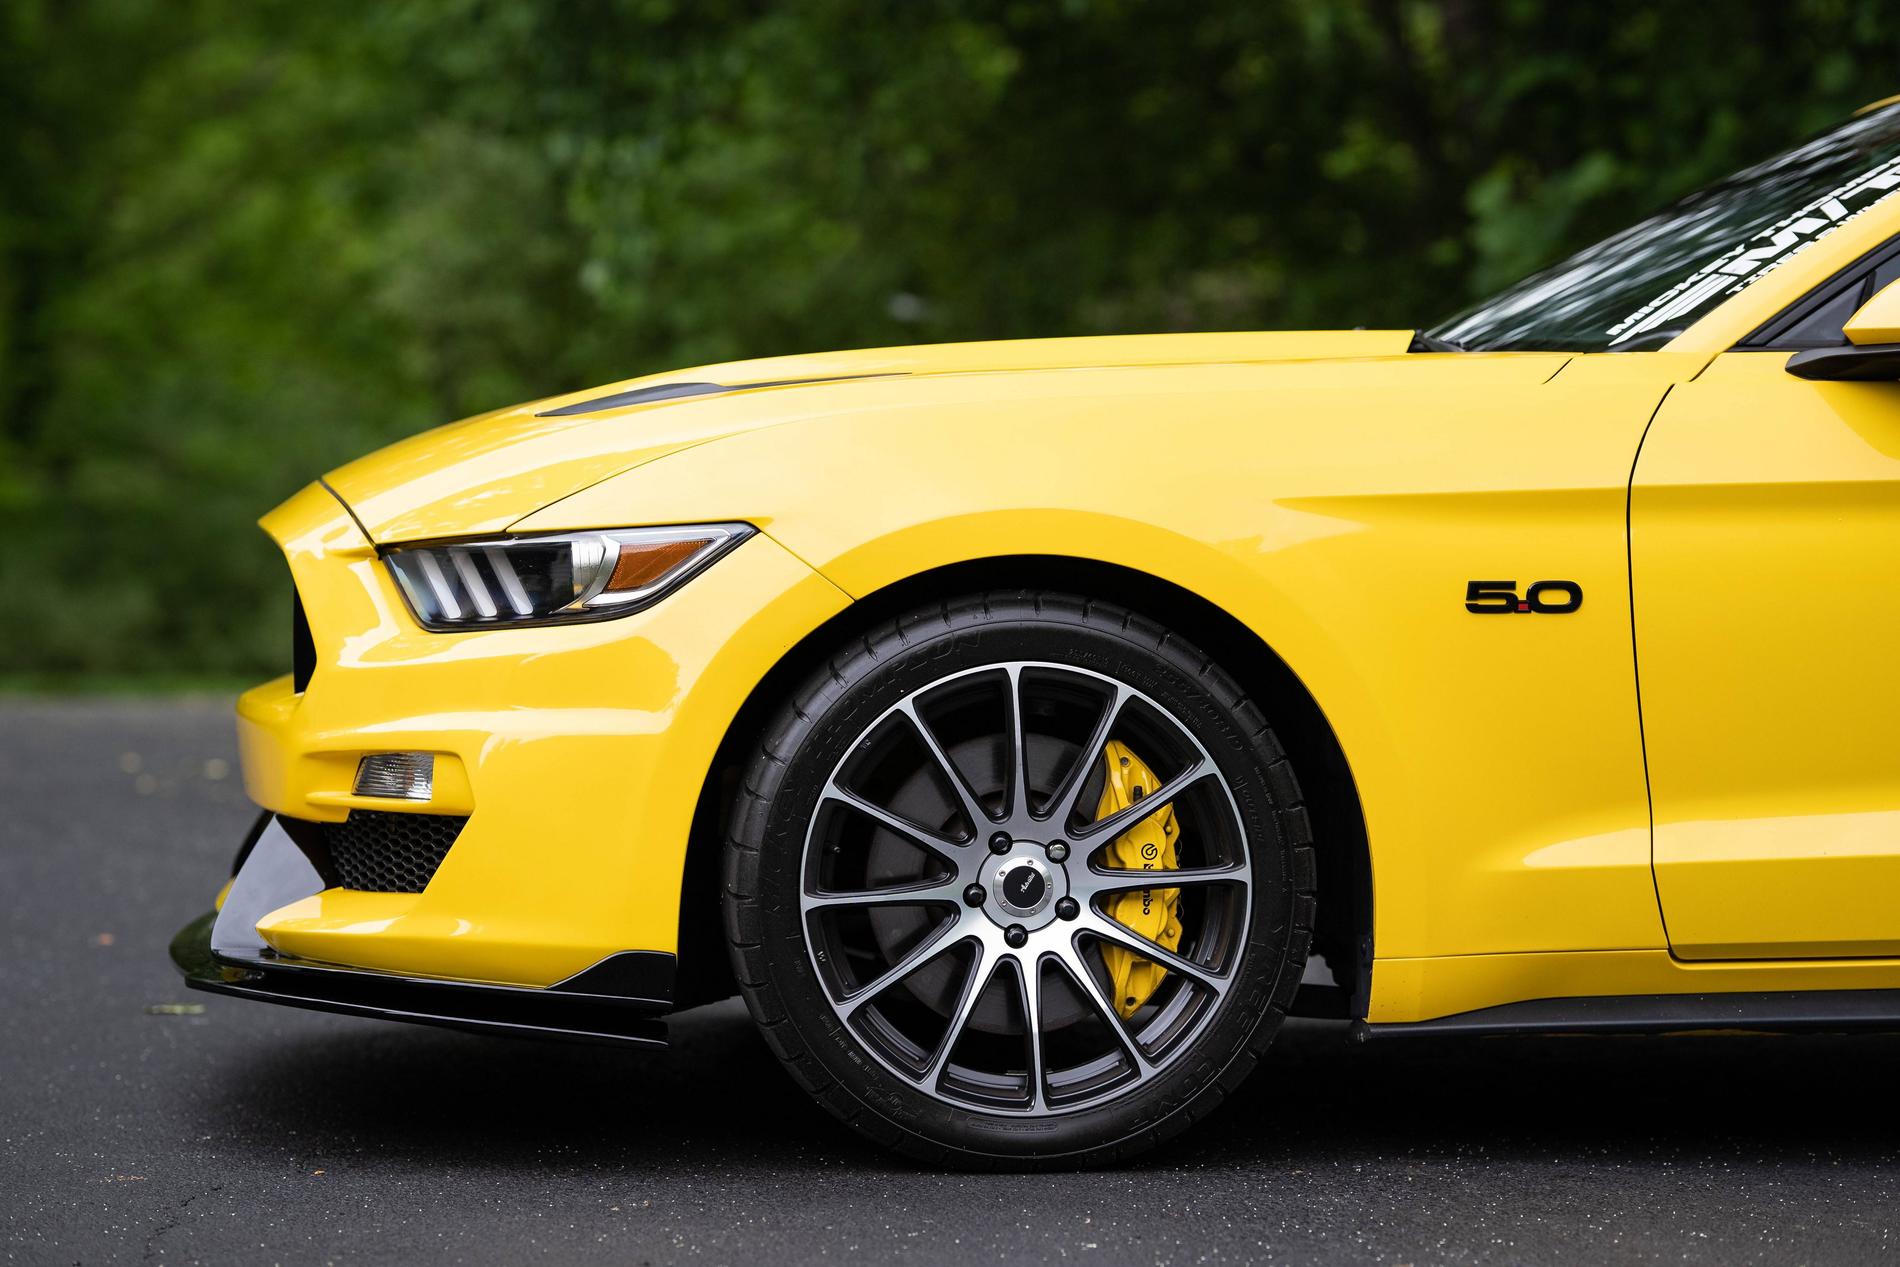 S650 Mustang Official YELLOW SPLASH Mustang S650 Thread GxnDJTy (1)